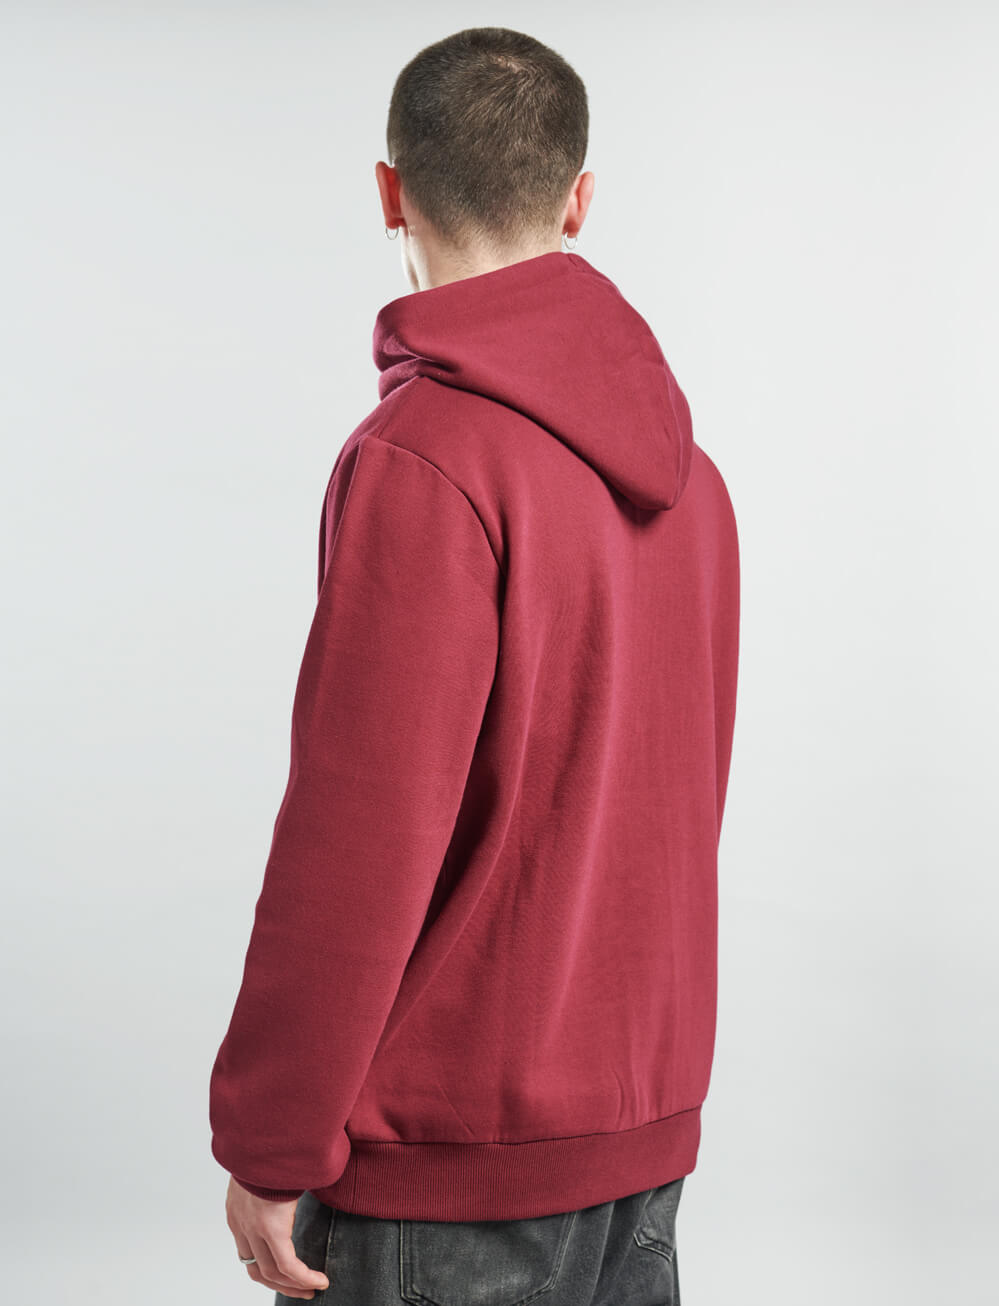 Official West Ham United Crest Hoodie - Claret - The World Football Store